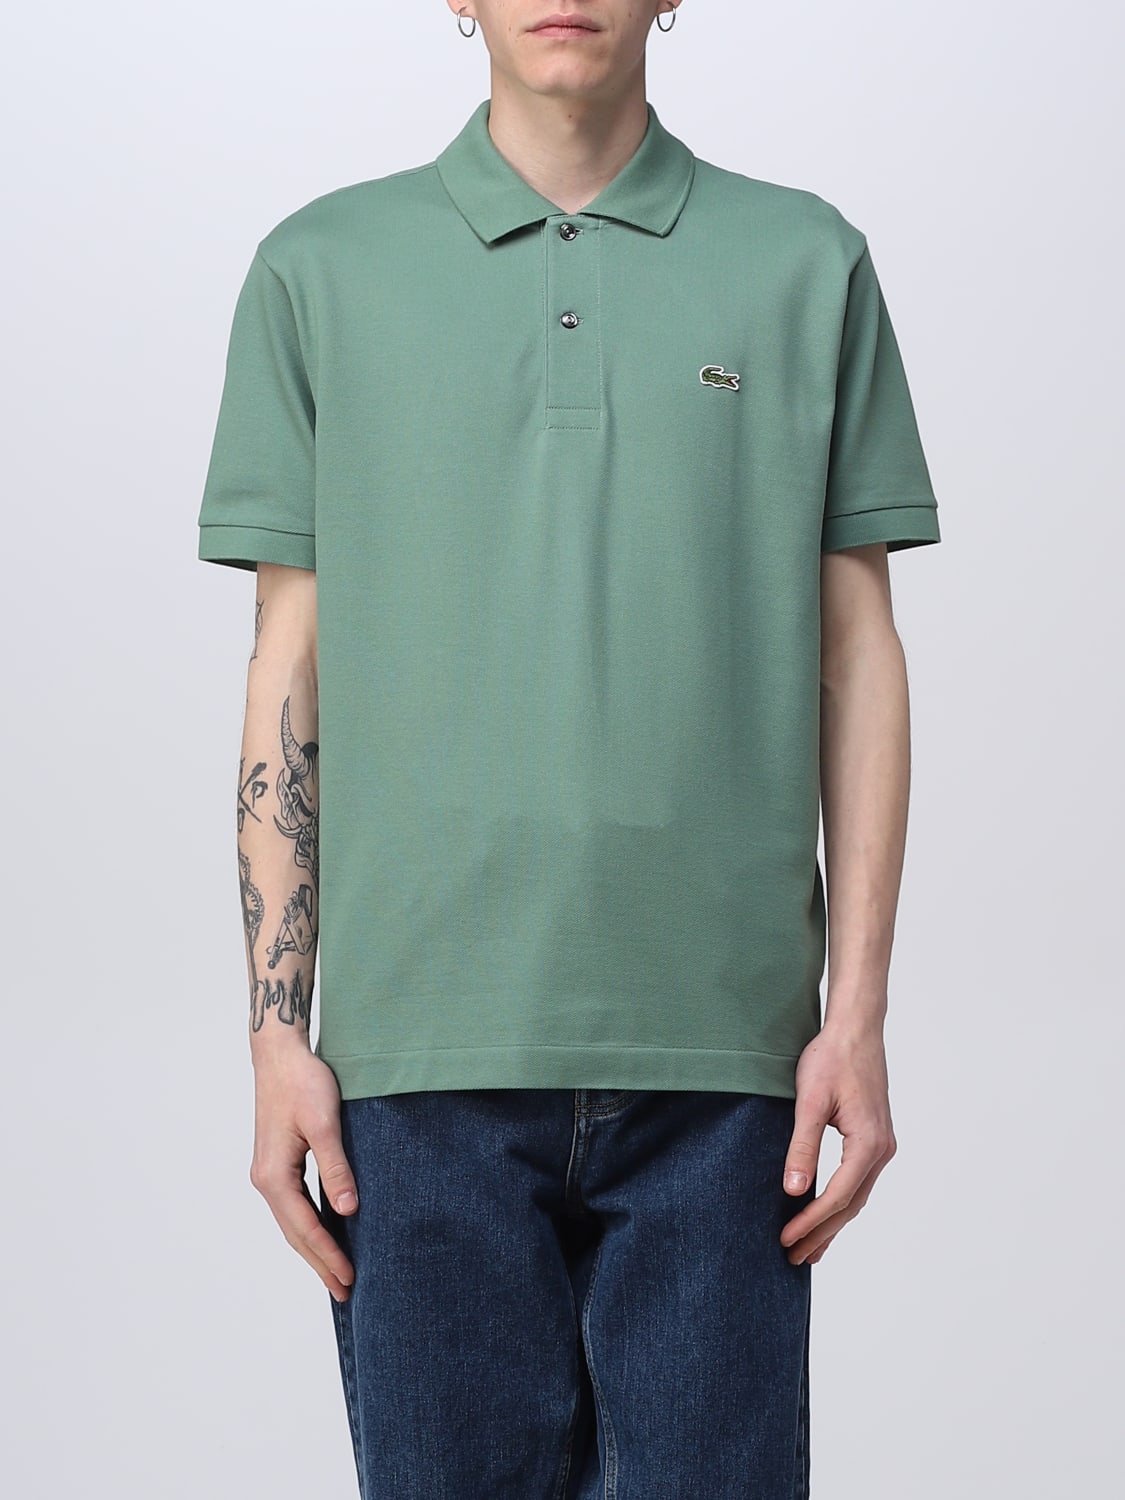 LACOSTE: polo shirt man - Forest | Lacoste polo shirt AB1212 online on GIGLIO.COM